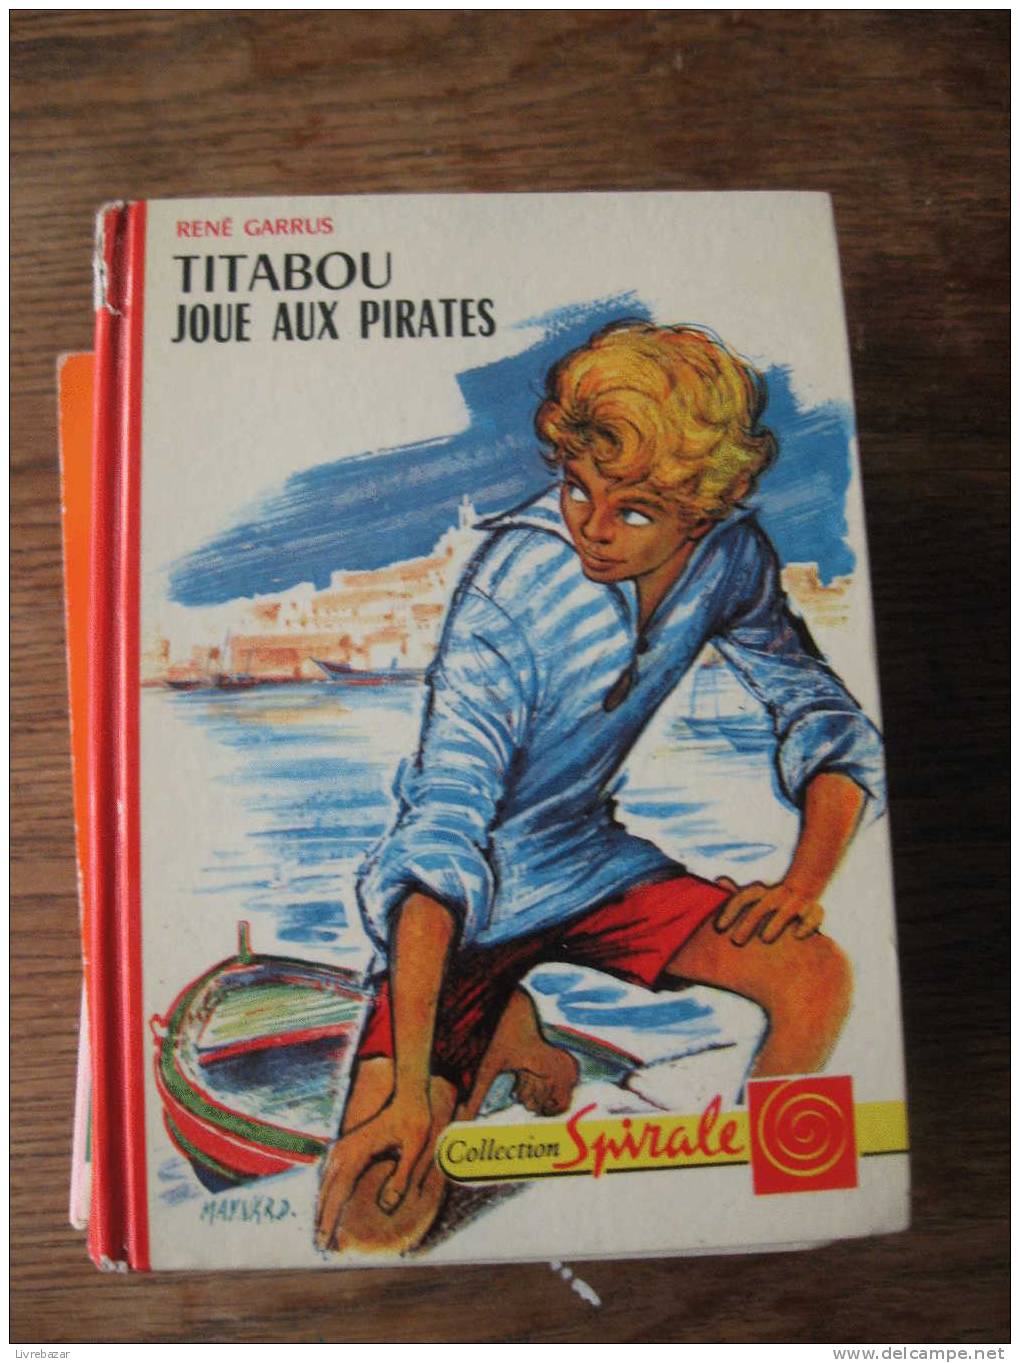 Ancien TITABOU JOUE AUX PIRATES  Illustrations Guy Maynard - Collection Spirale